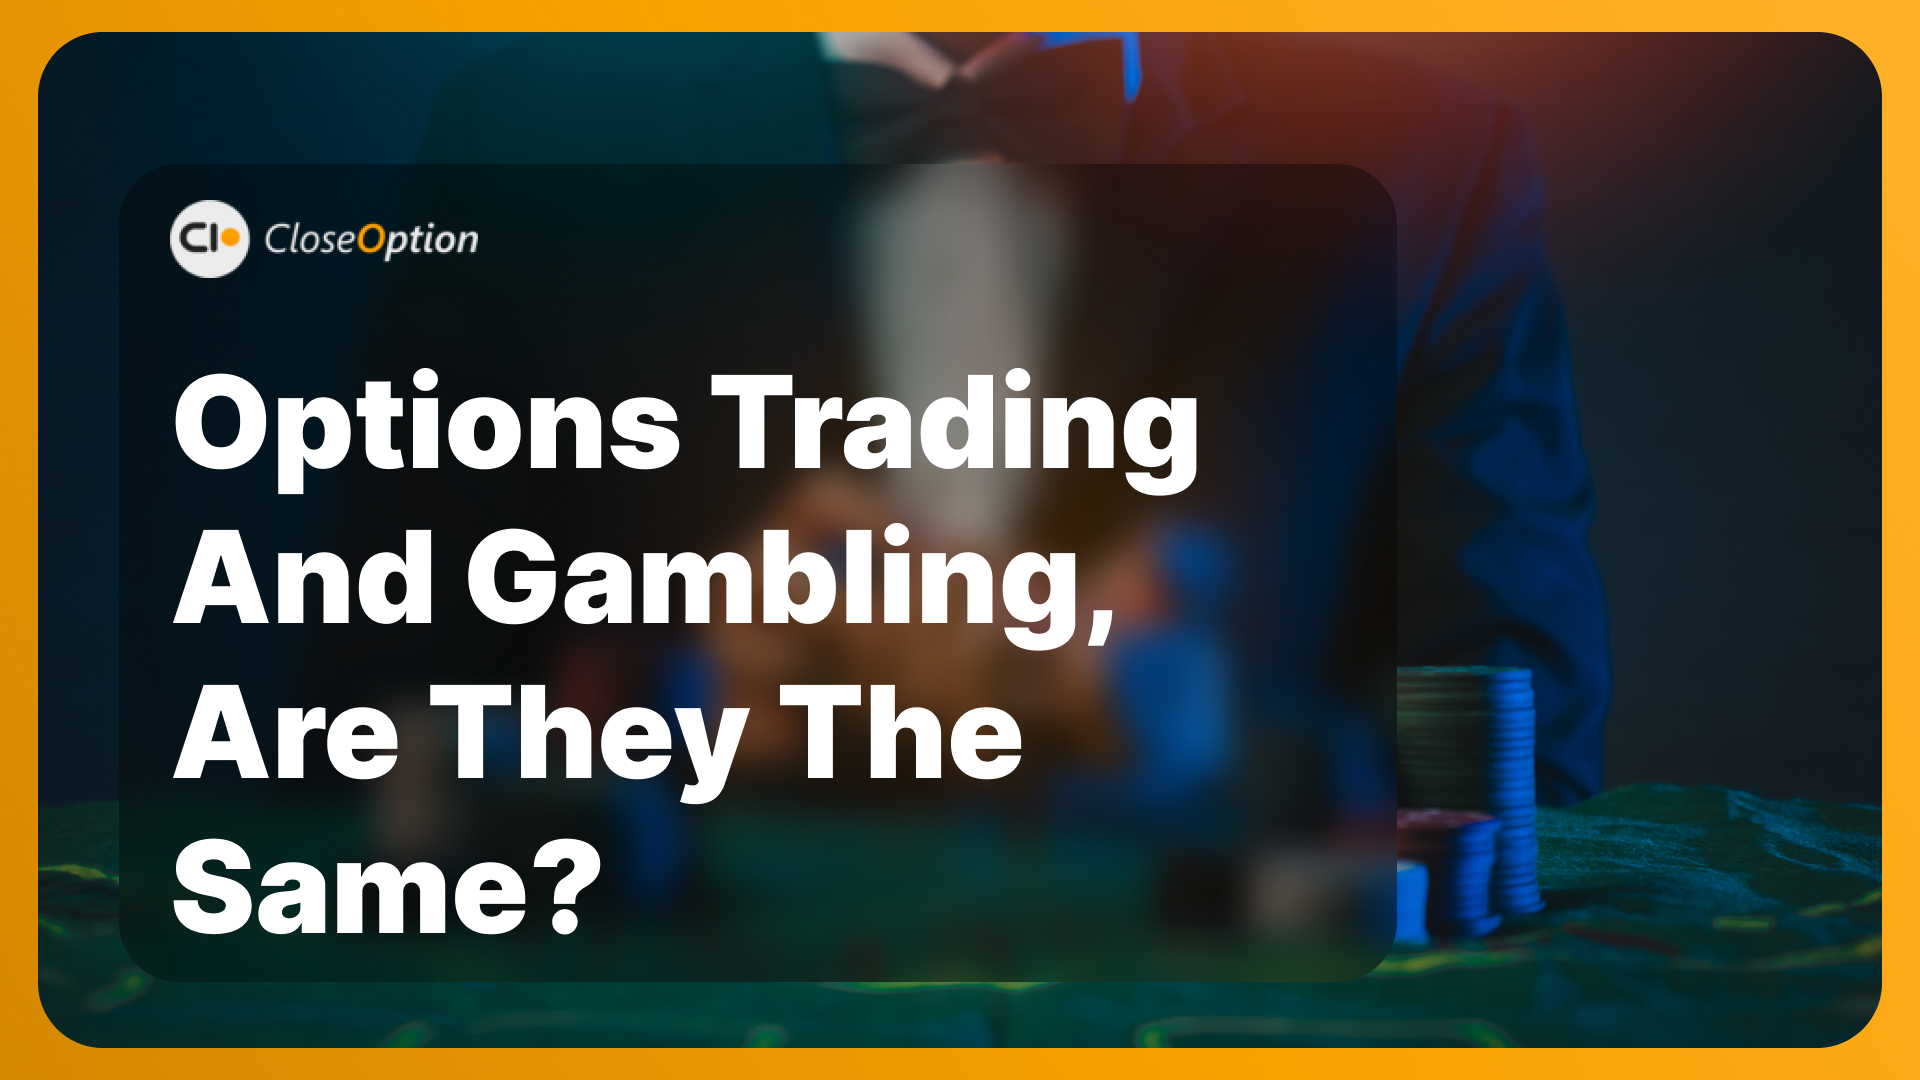 Are Options Trading and Gambling the Same?